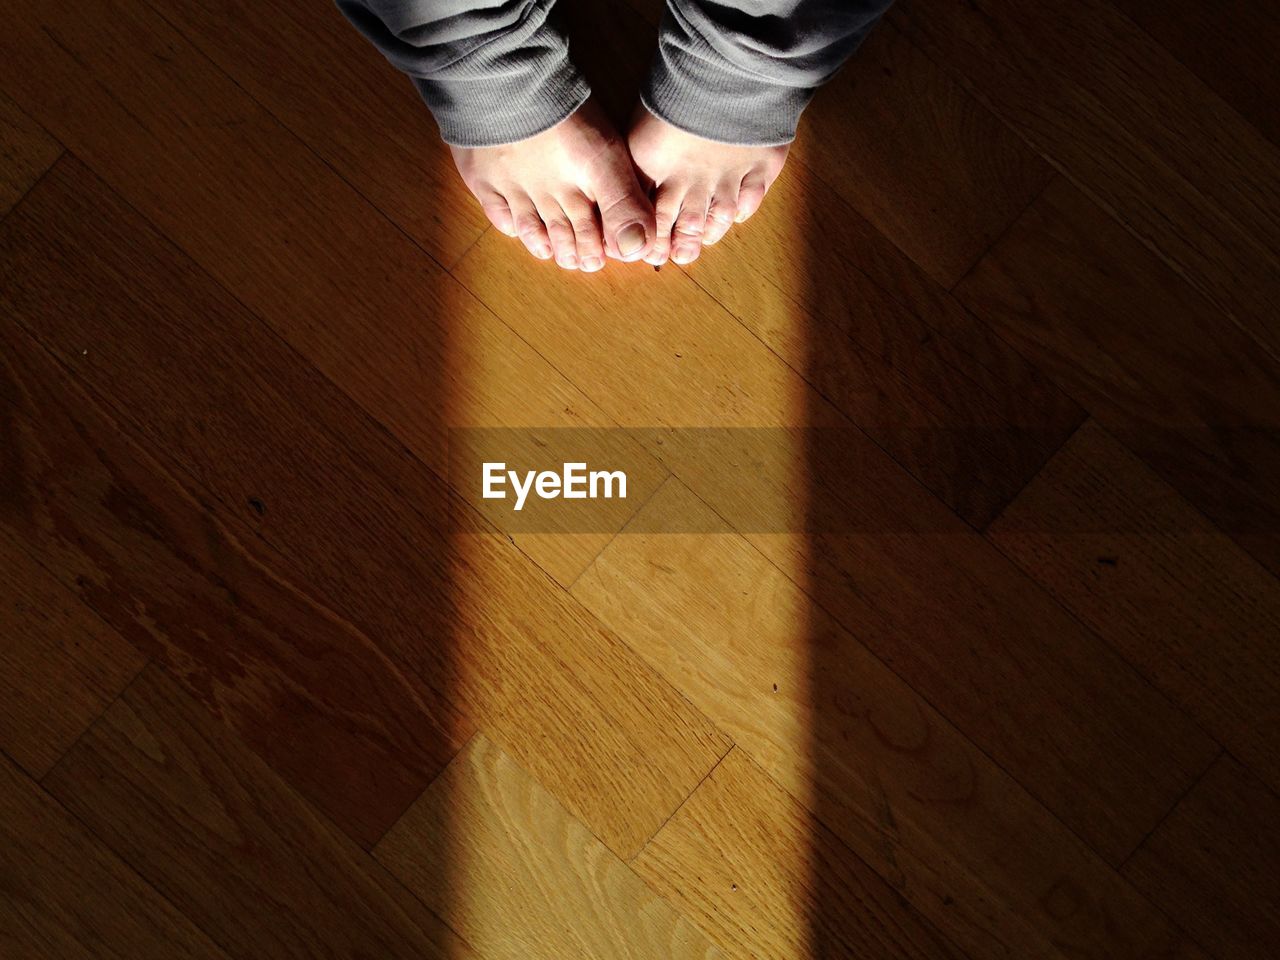 Sunlight falling on legs of person standing at floor